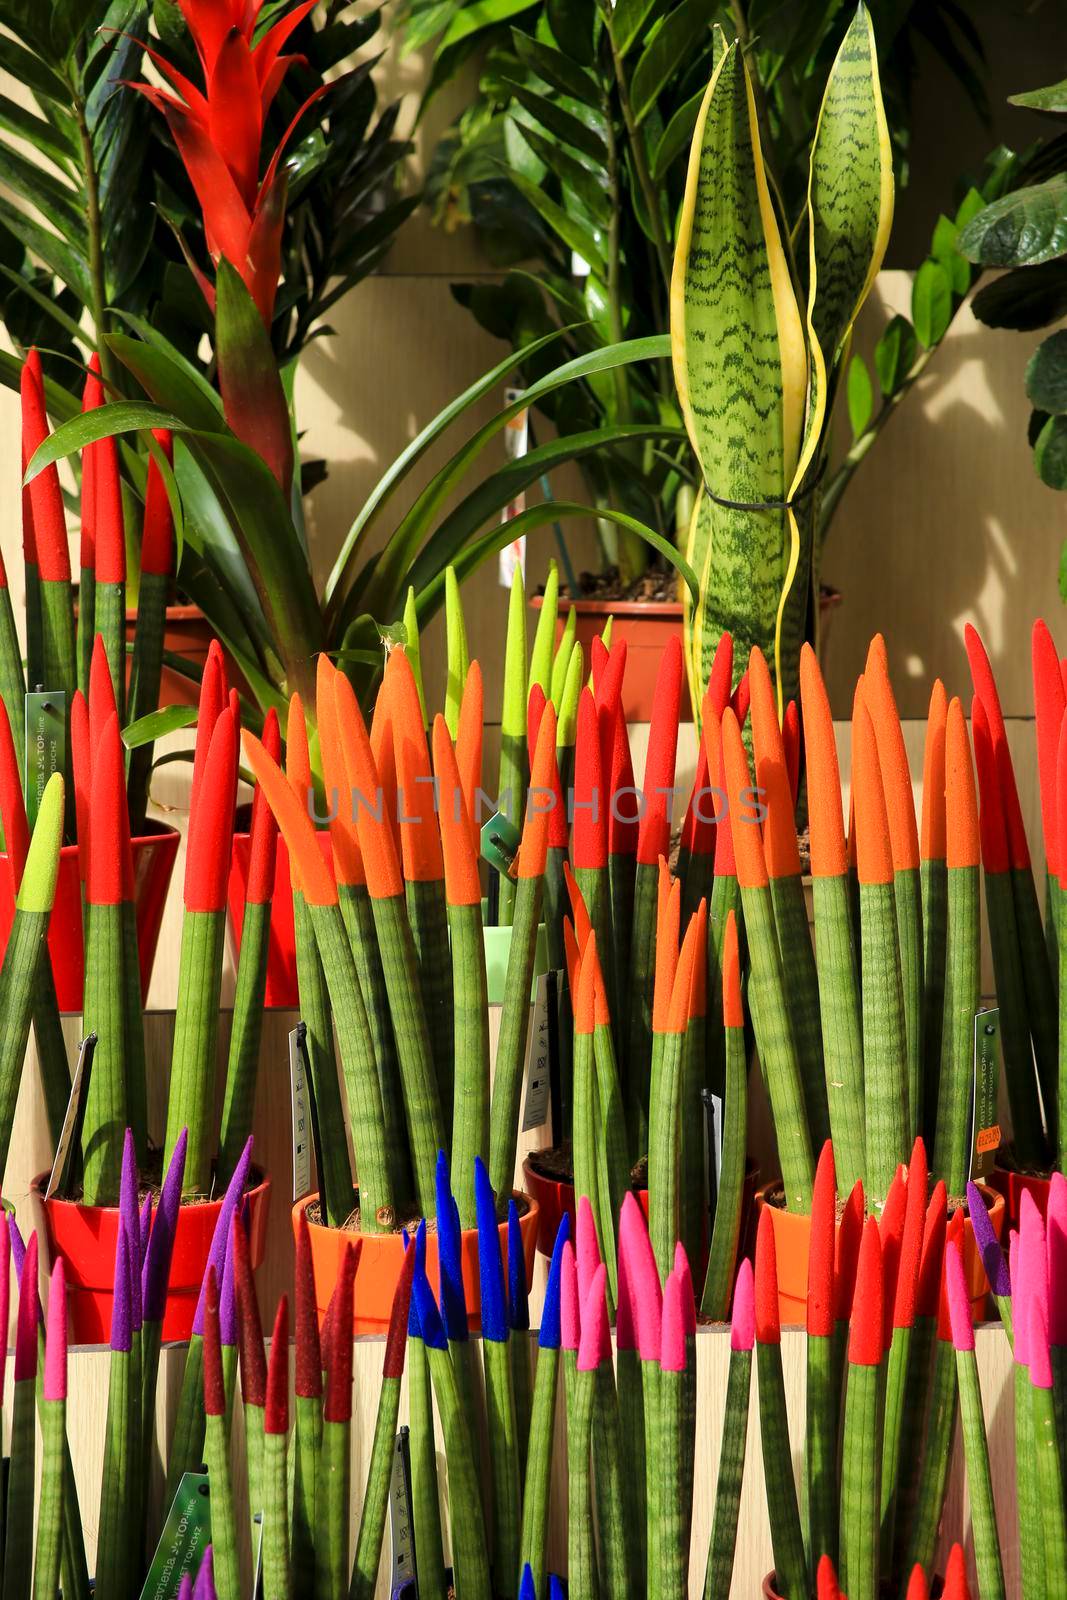 Painted Sansevieria Cylindrica for sale at a market stall by soniabonet